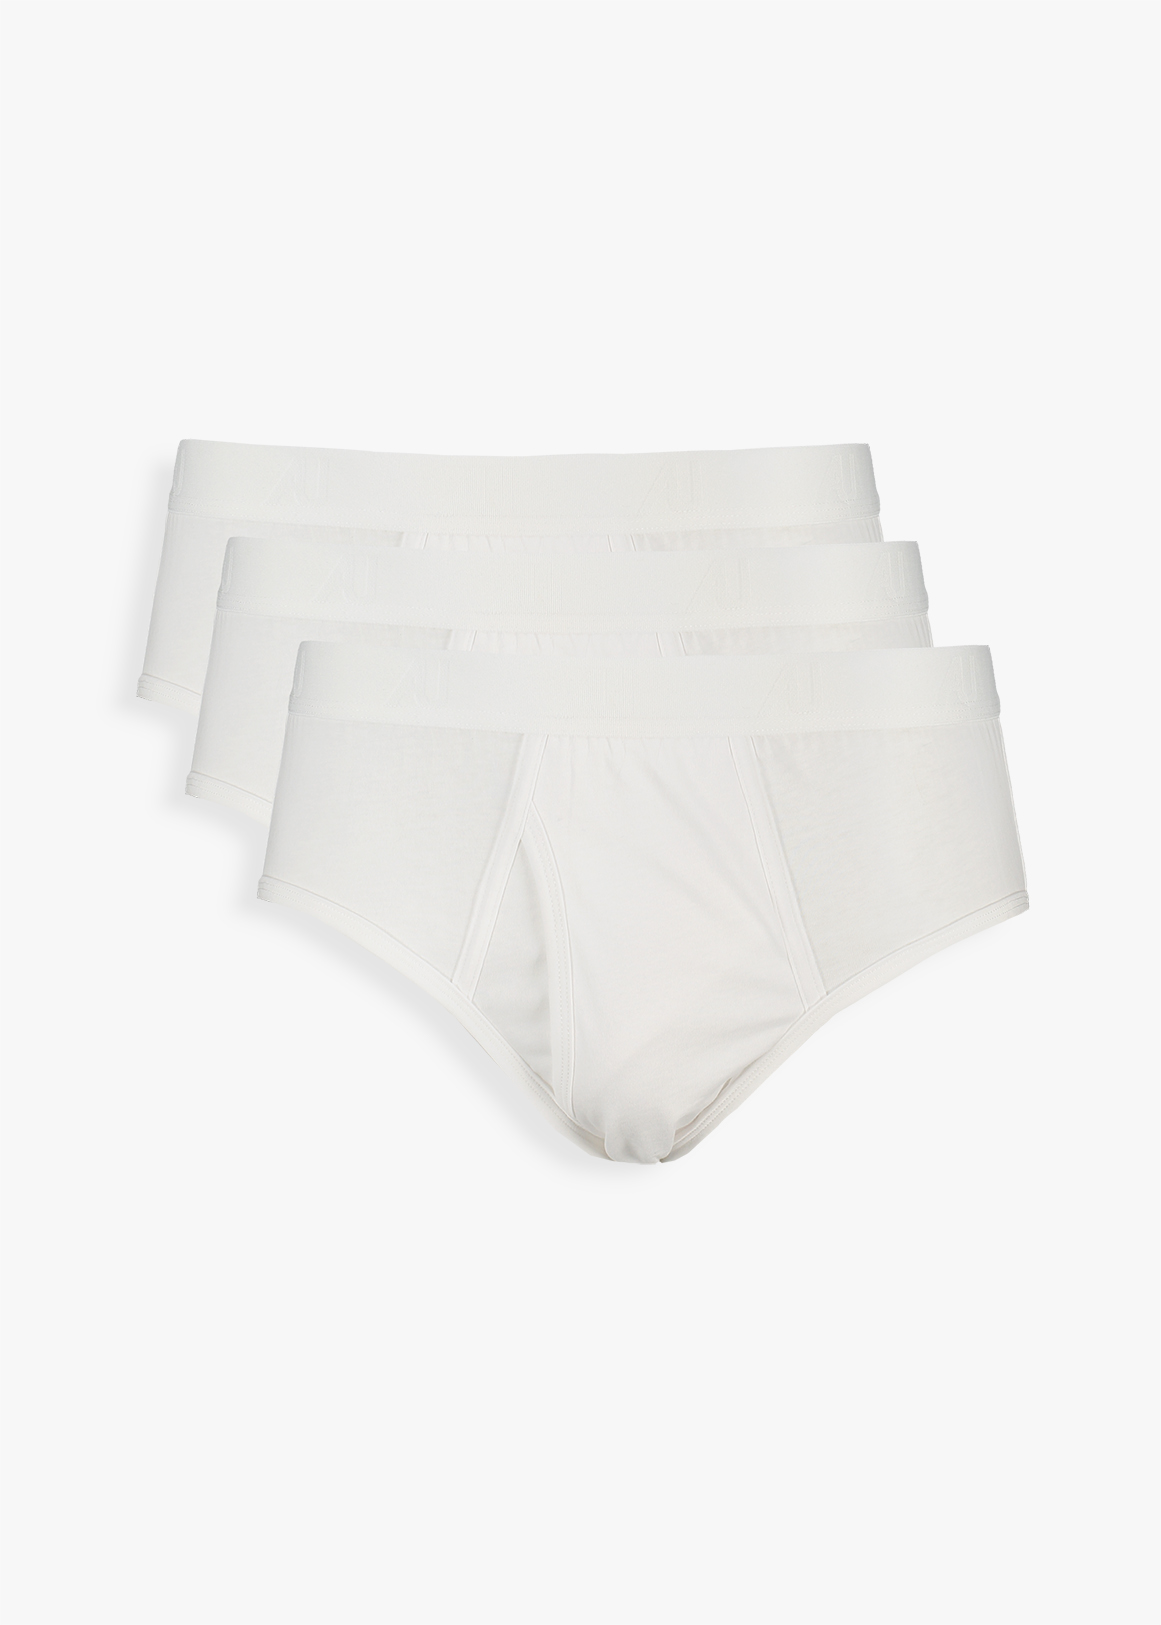 StayNew COOLTECH Cotton Briefs 3 Pack | Woolworths.co.za